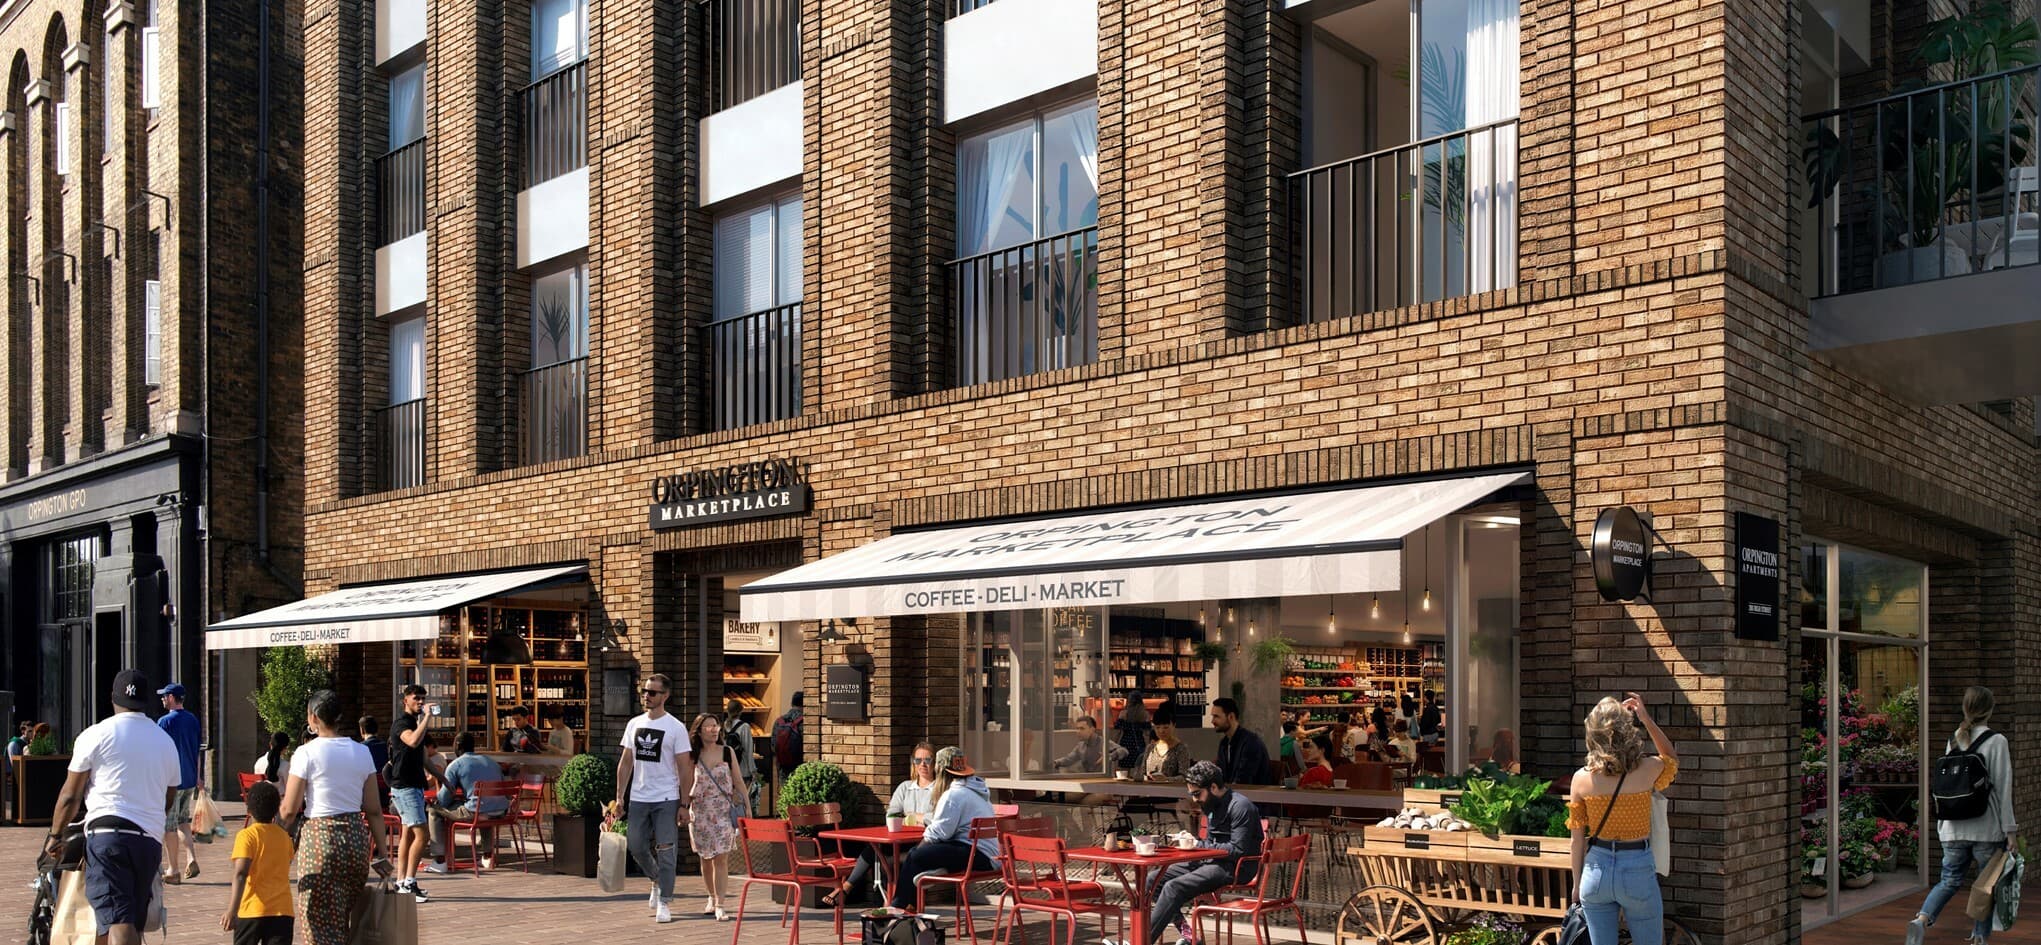 Introducing Orpington Market Place: community based casual dining